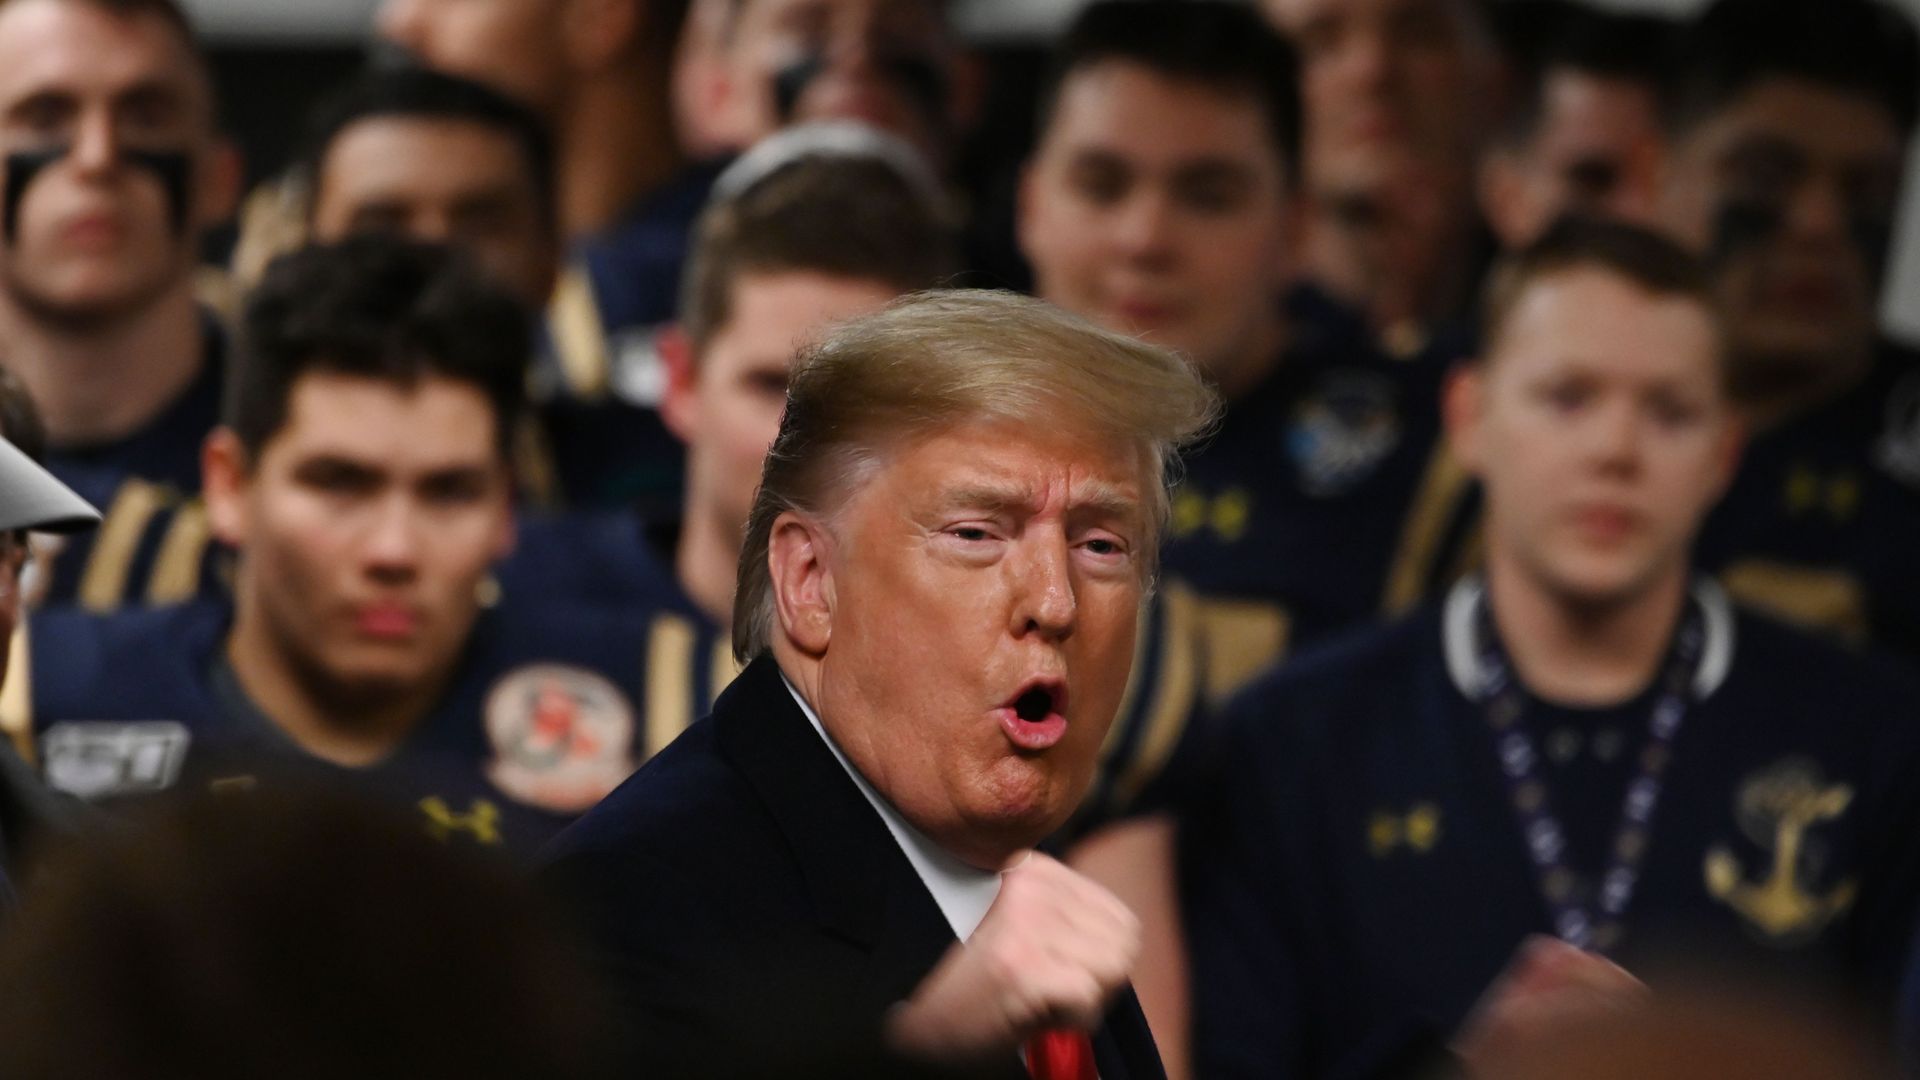  President Donald Trump speaks with Navy players in the locker room before the Army v. Navy American Football game in Philadelphia on December 14